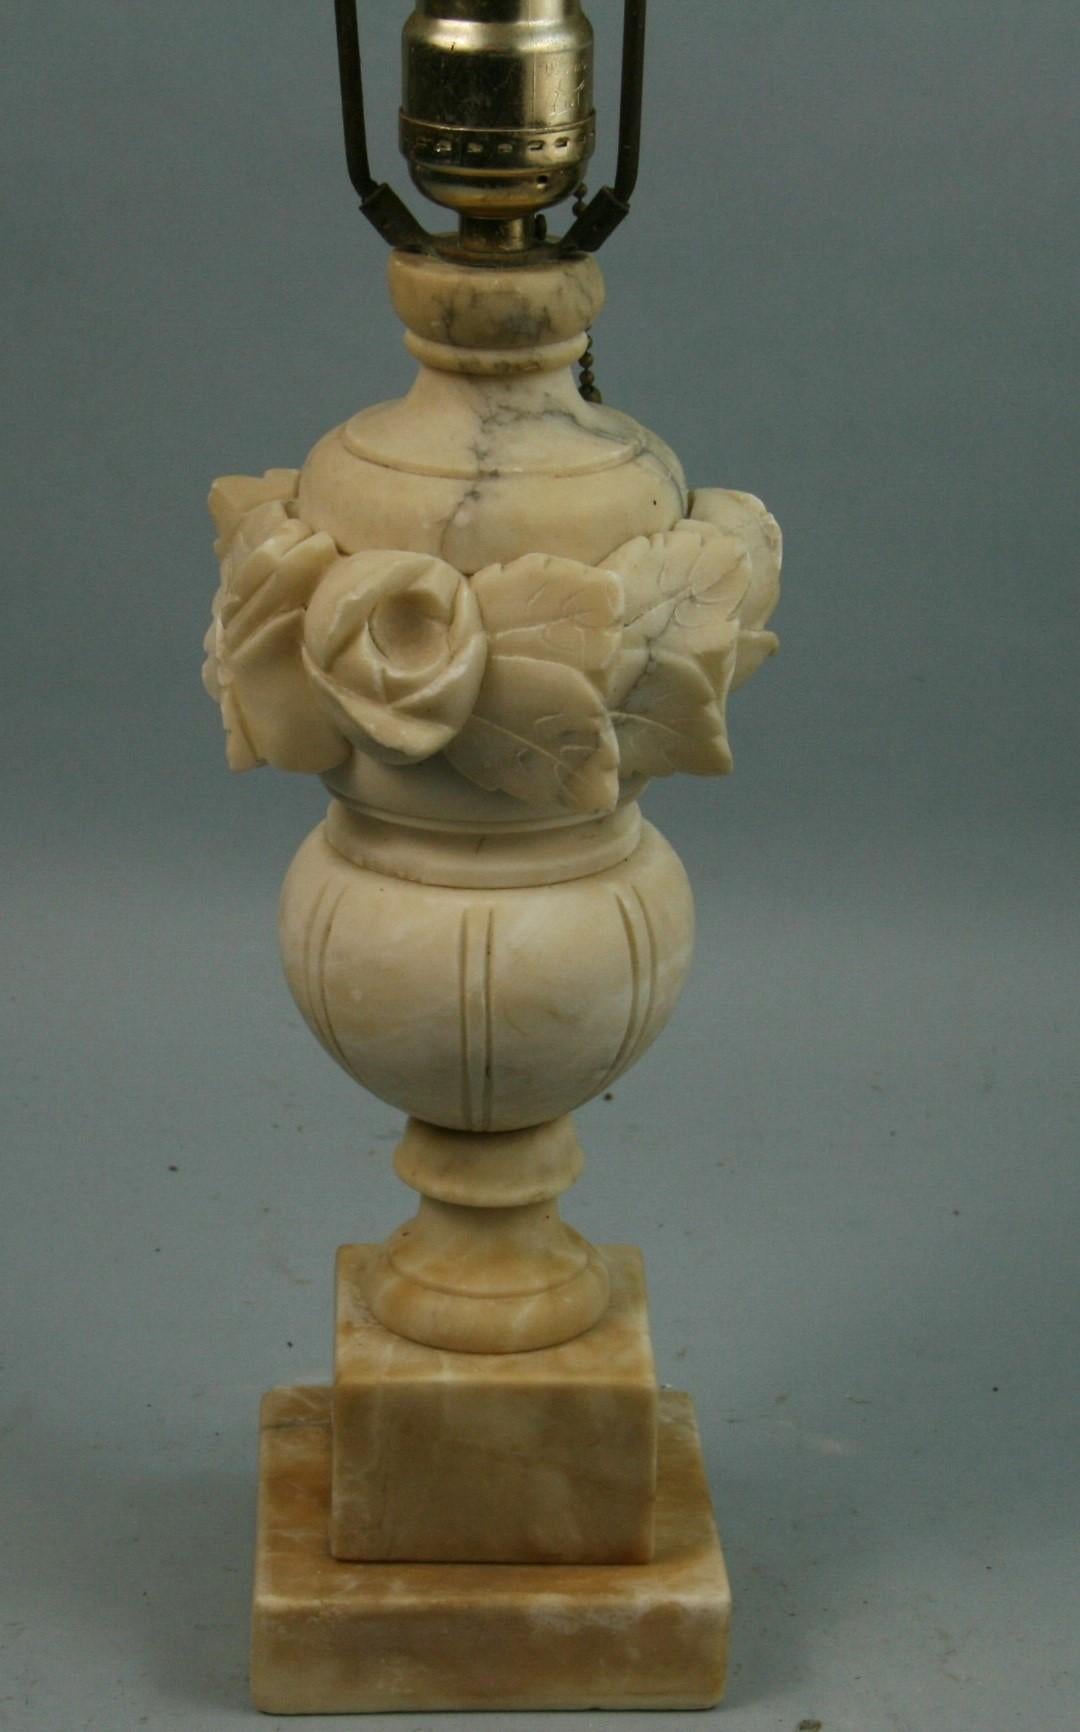 3-738 Italian alabaster hand carved lamp with rose and leaf motif
Height to top of socket 15